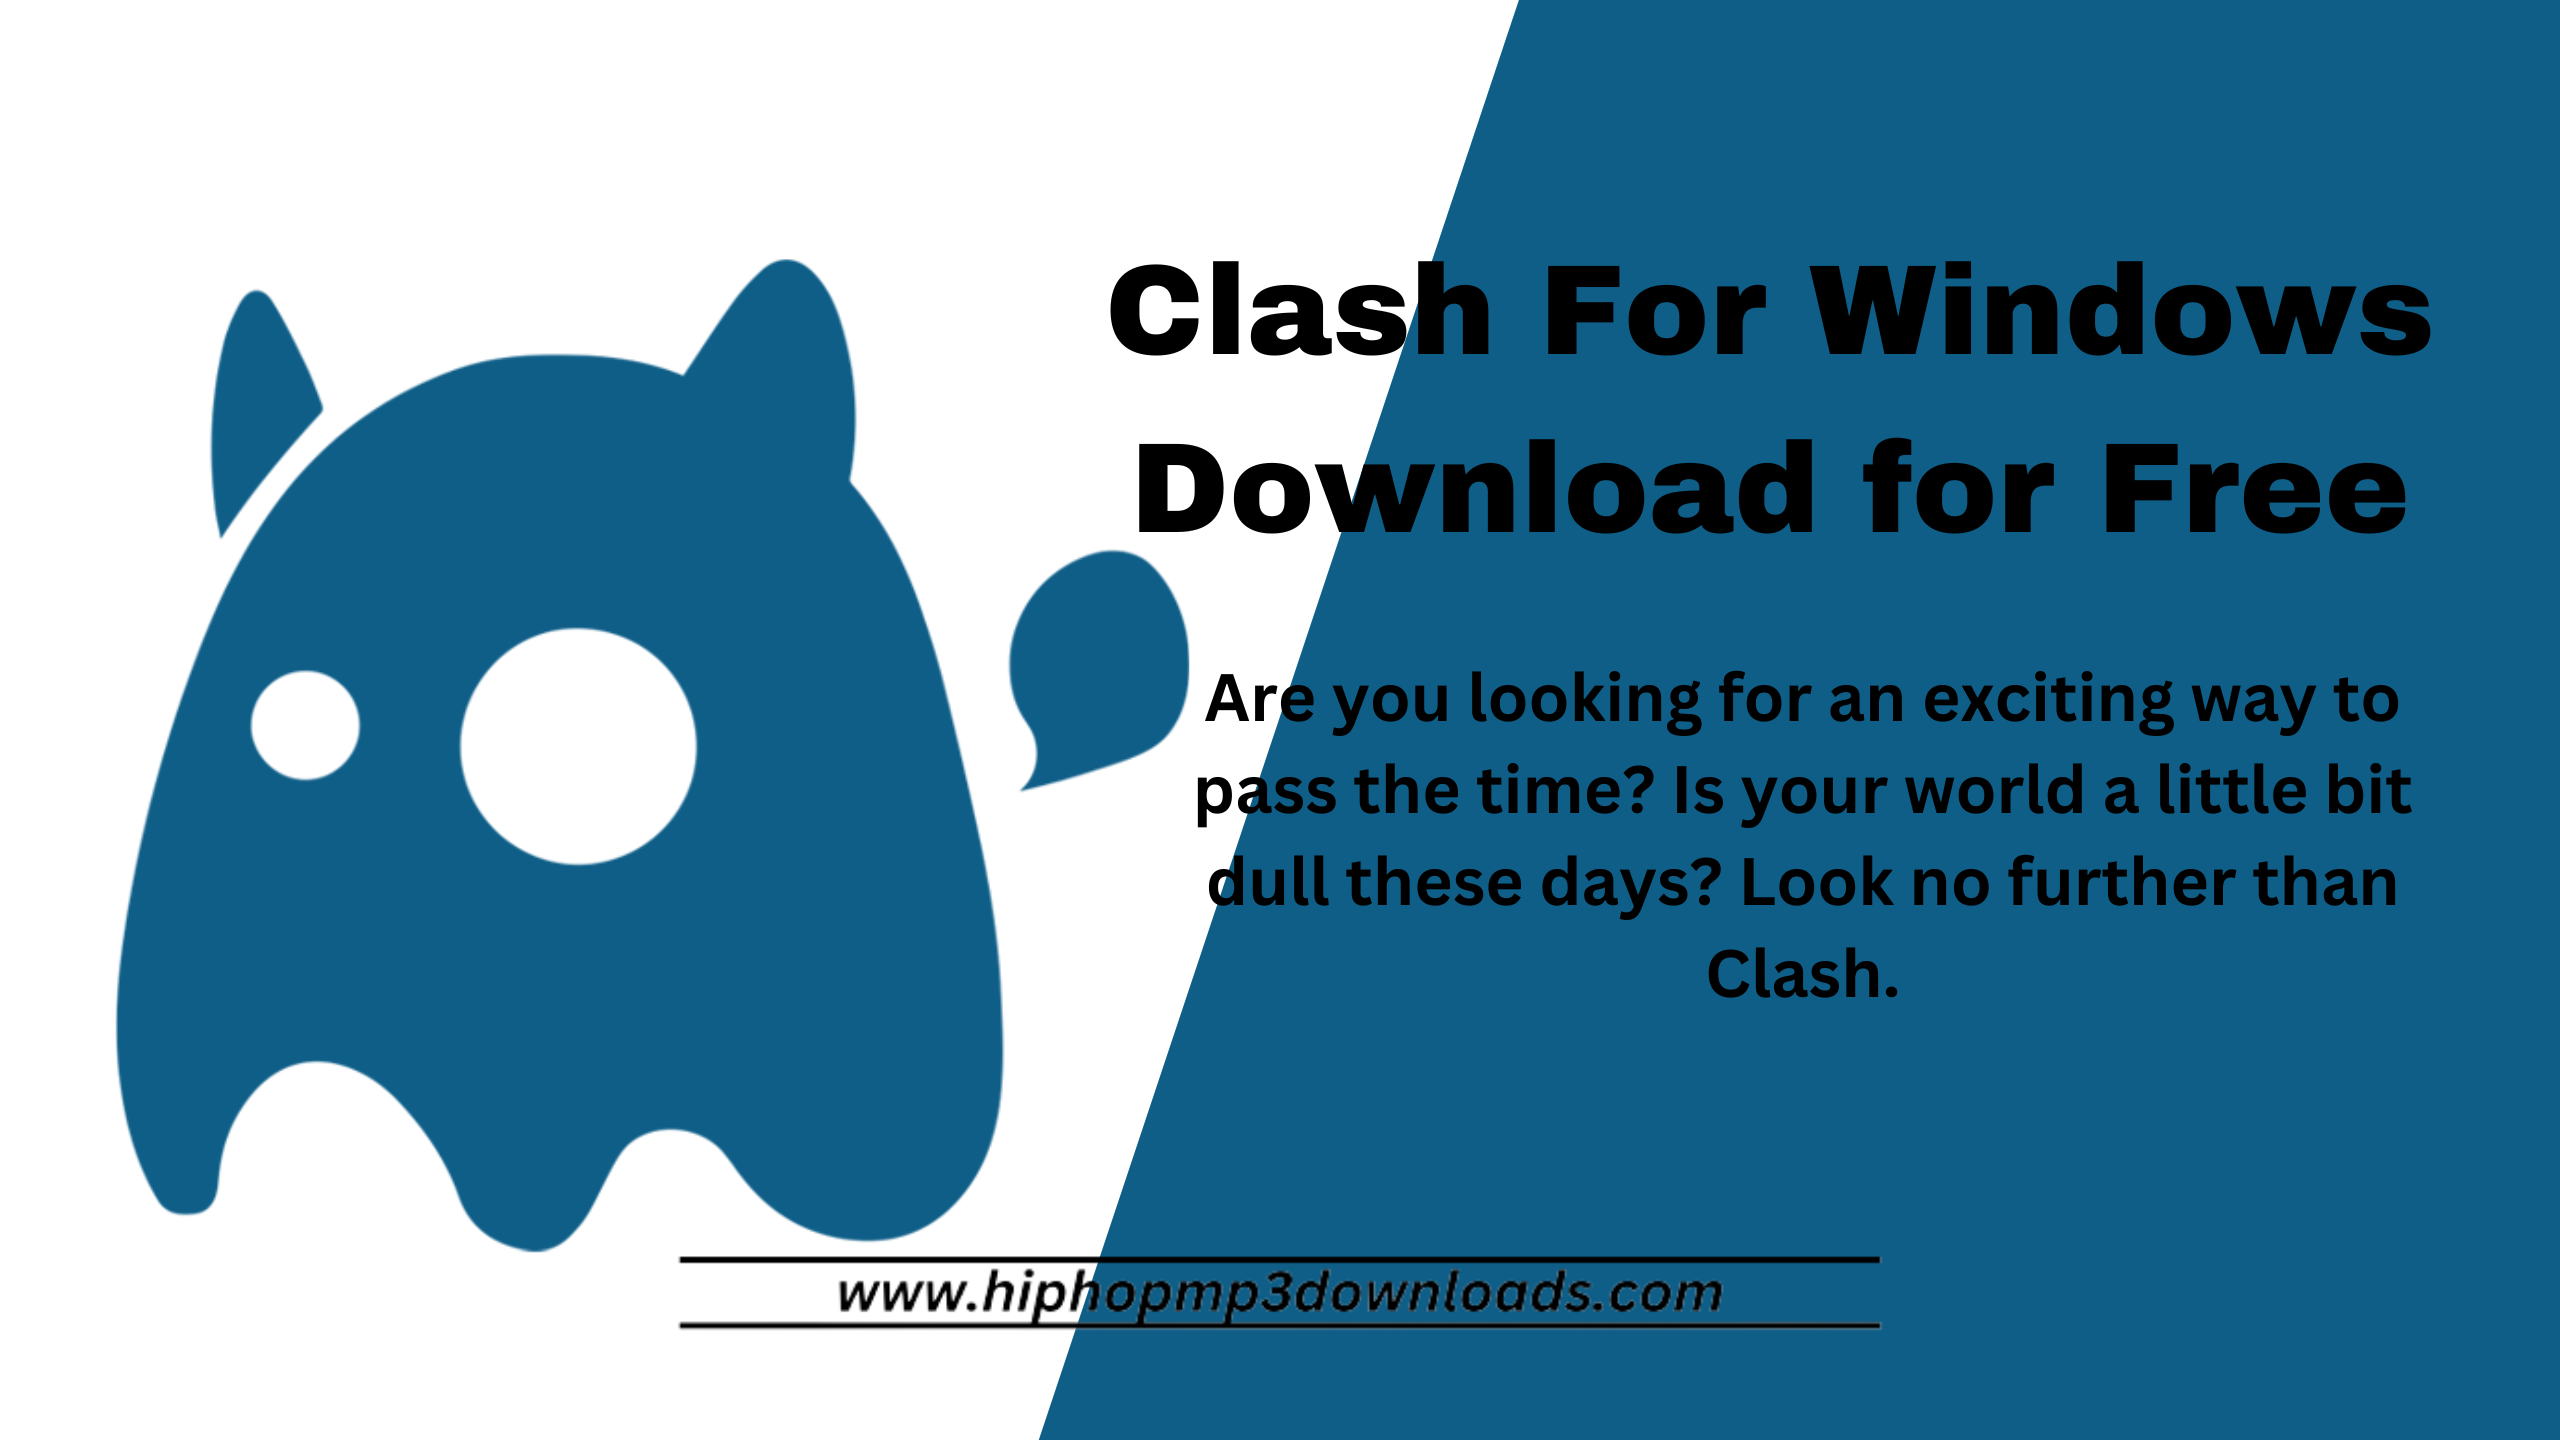 Clash For Windows Download for Free